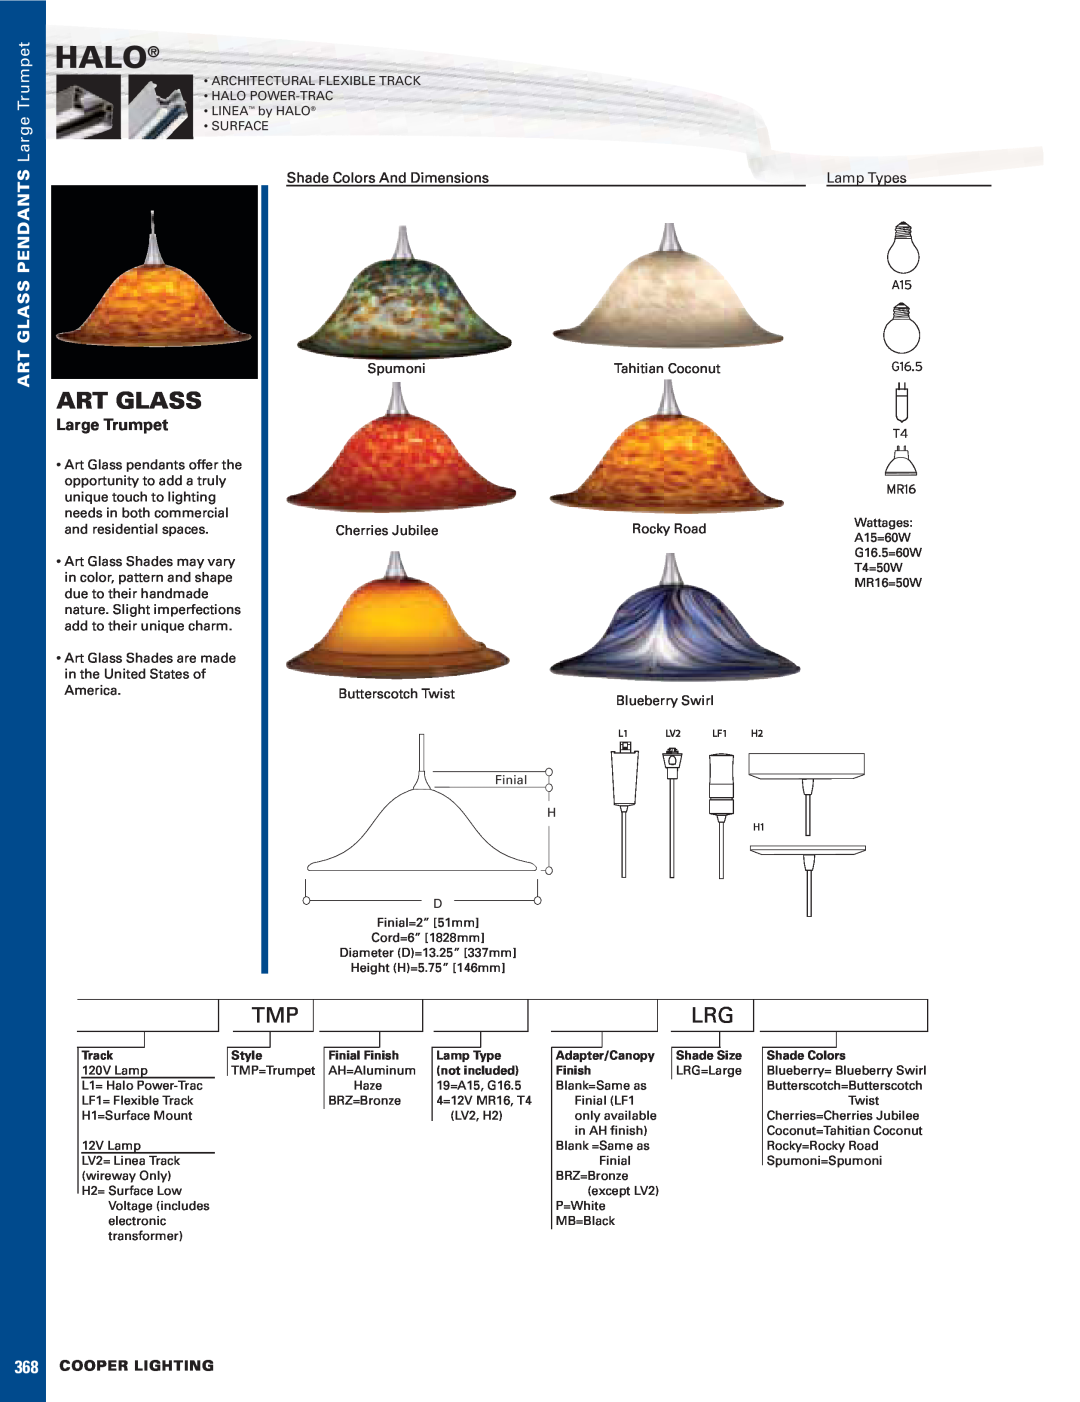 Cooper Lighting Large Trumpet dimensions Halo, Art Glass, Glass Pendants, Shade Colors And Dimensions, Lamp Types 